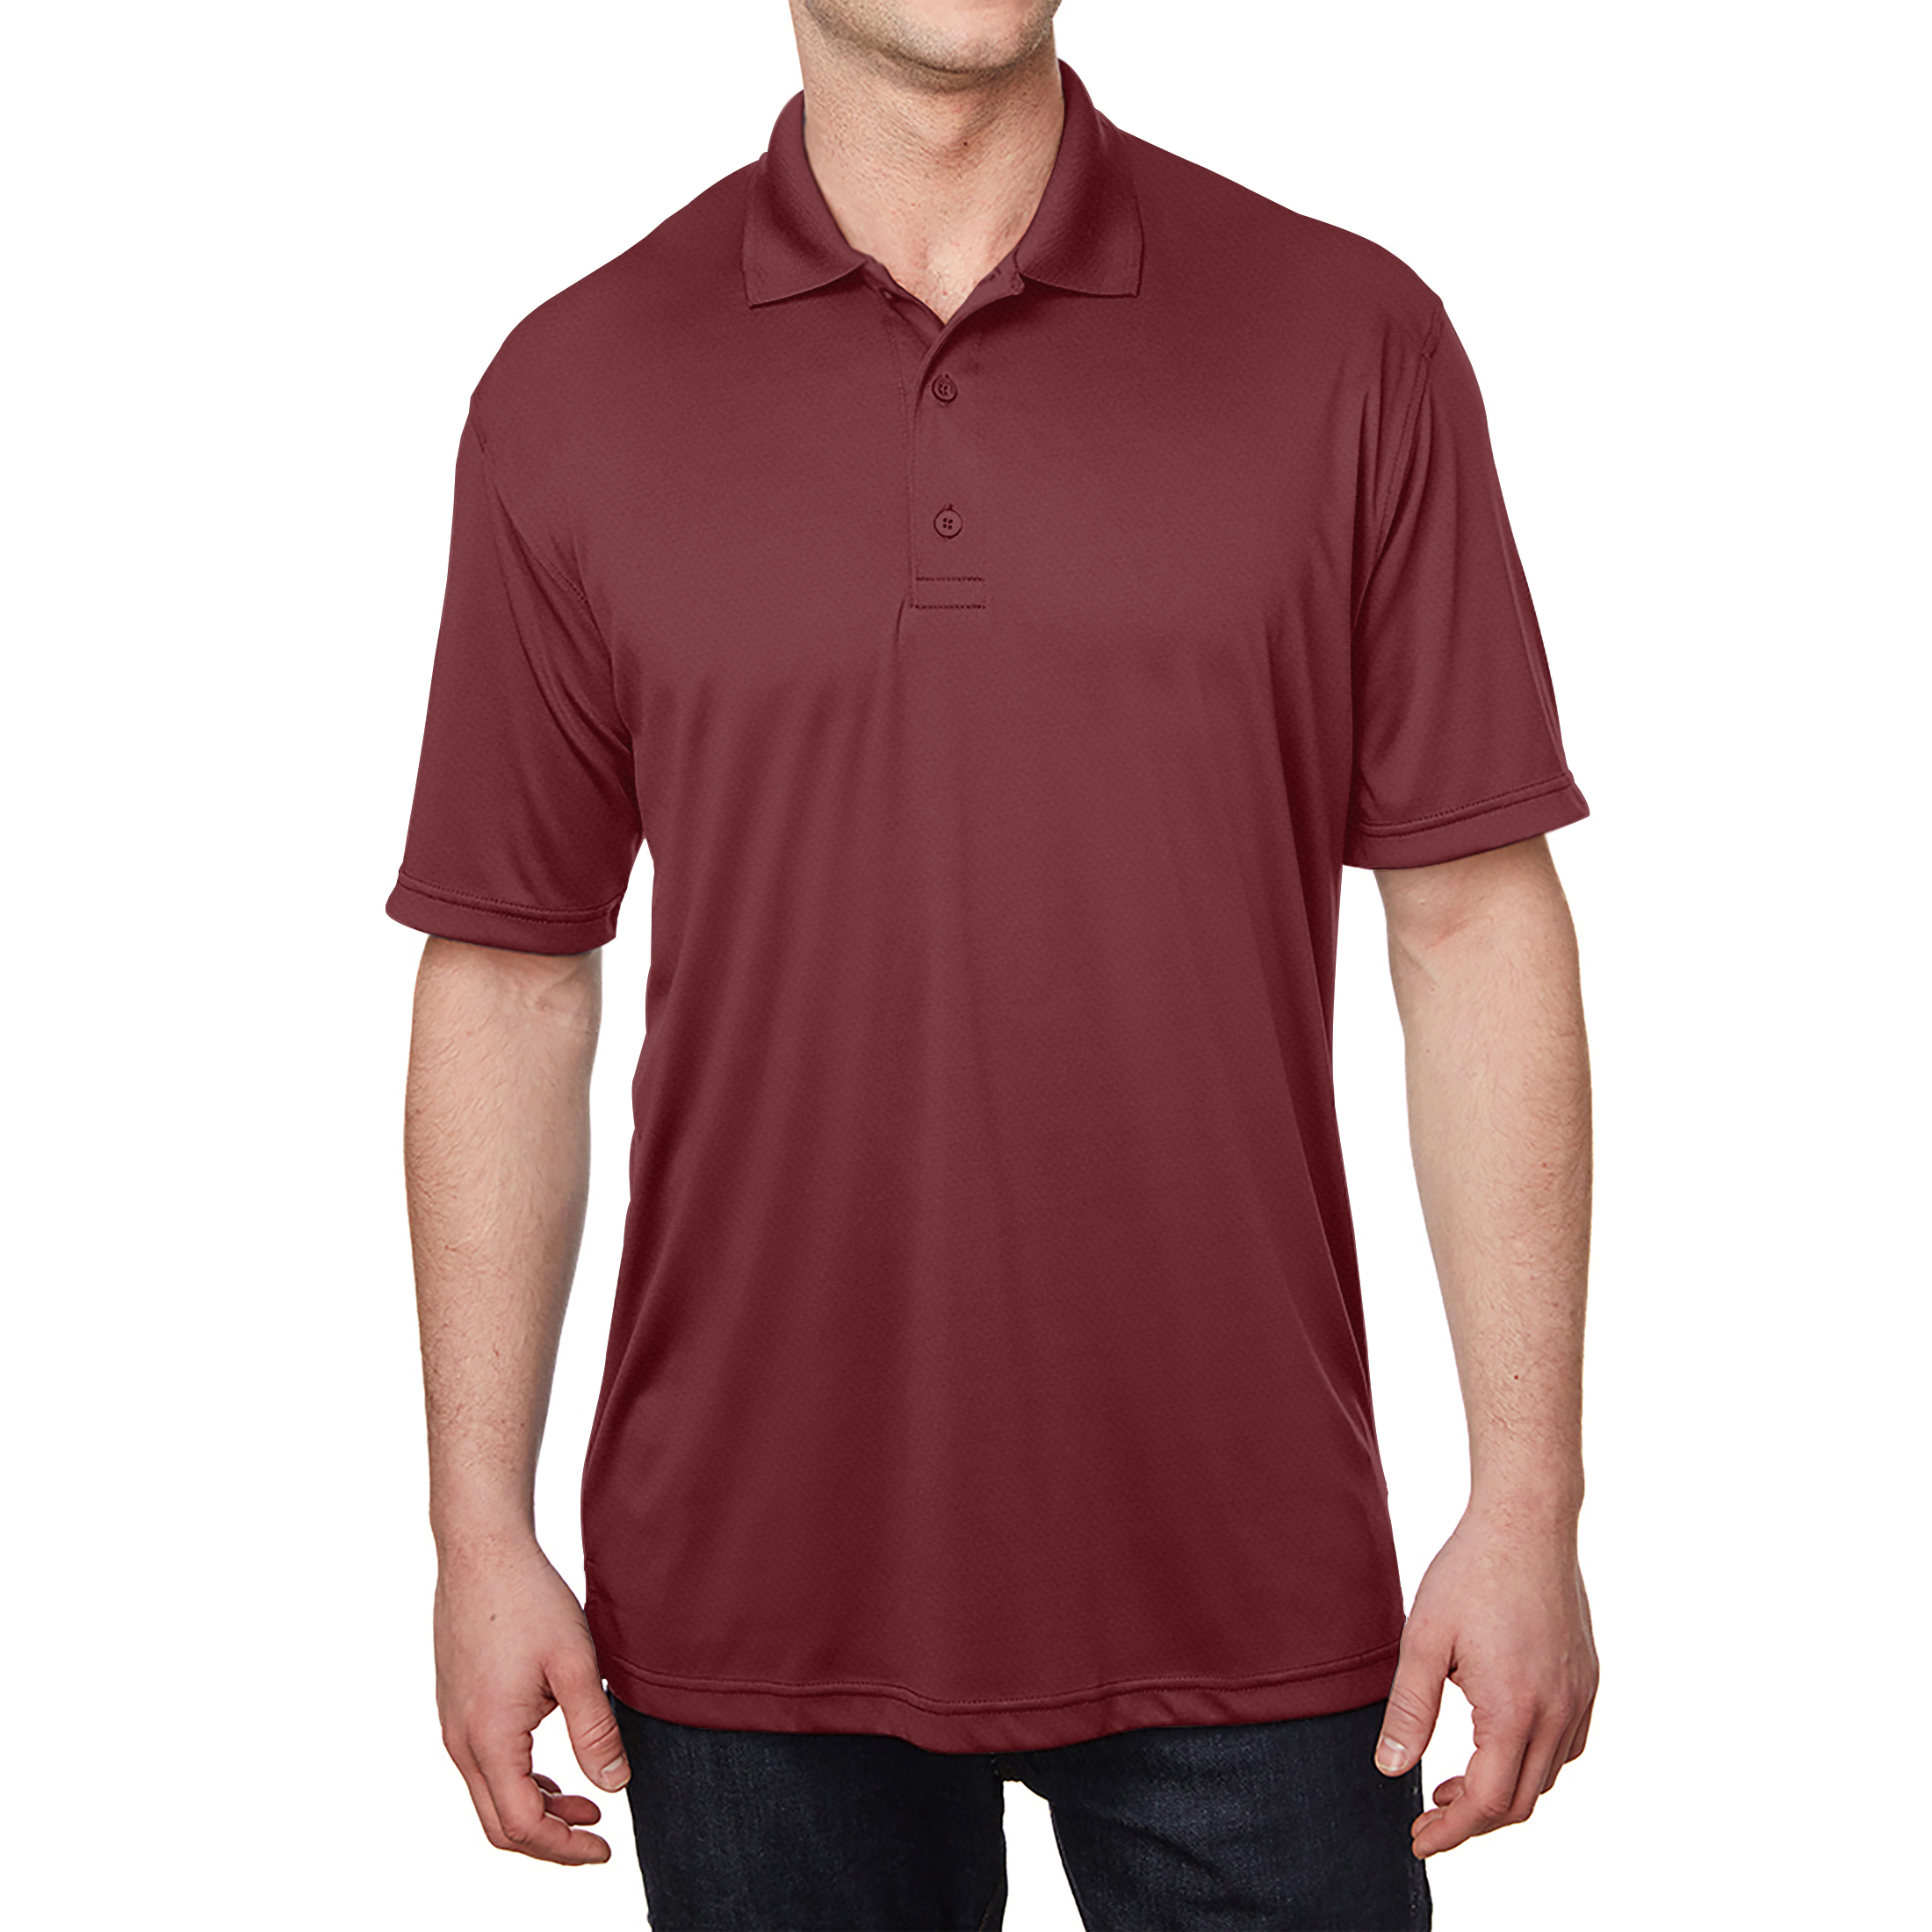 3-Pack Men's Gildan Active Moisture Wicking Dry Fit Polo Shirts - Small